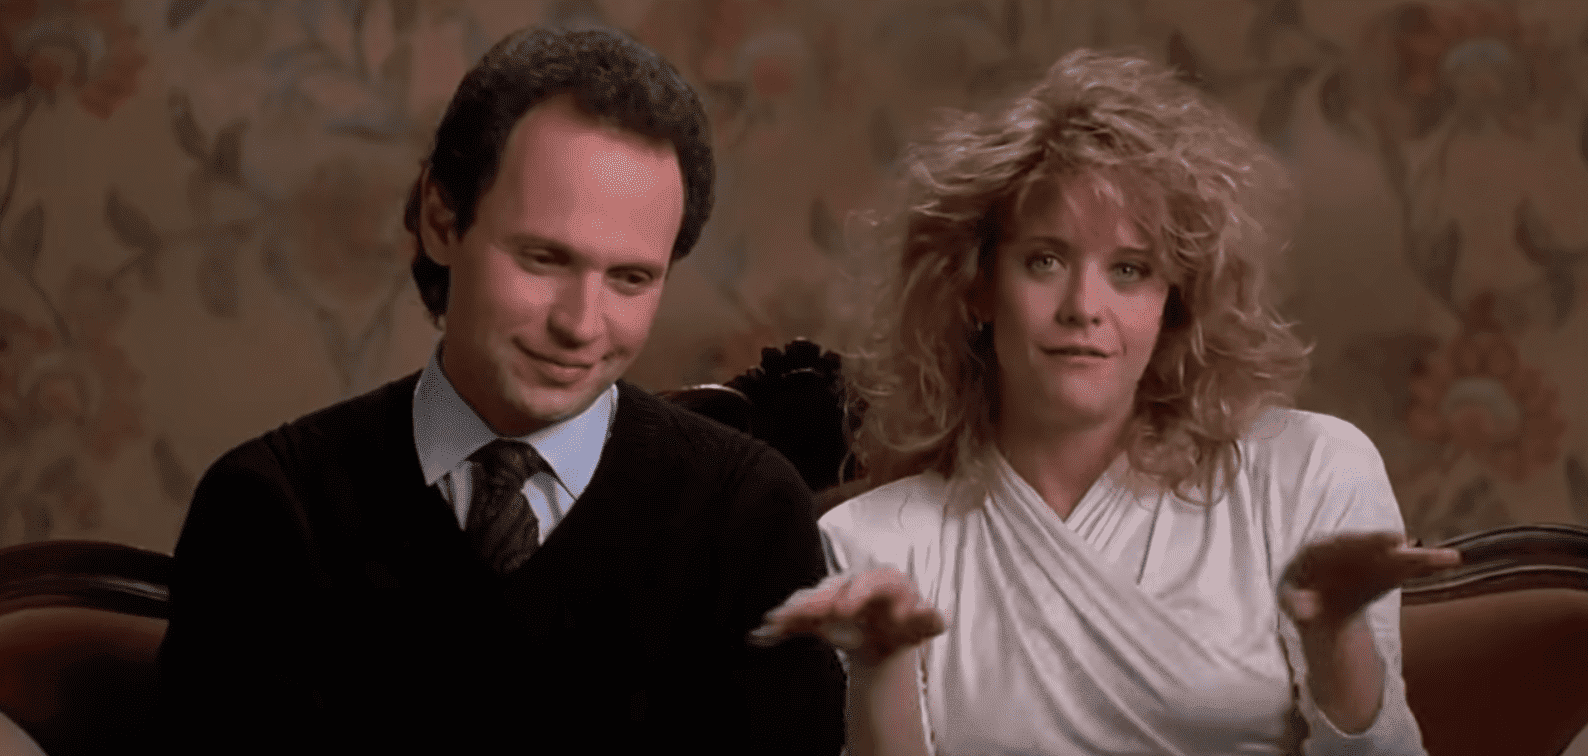  Meg Ryan‘s Sally and Billy Crystal‘s Harry in the movie "When Harry met Sally." | Source: YouTube/msmojo